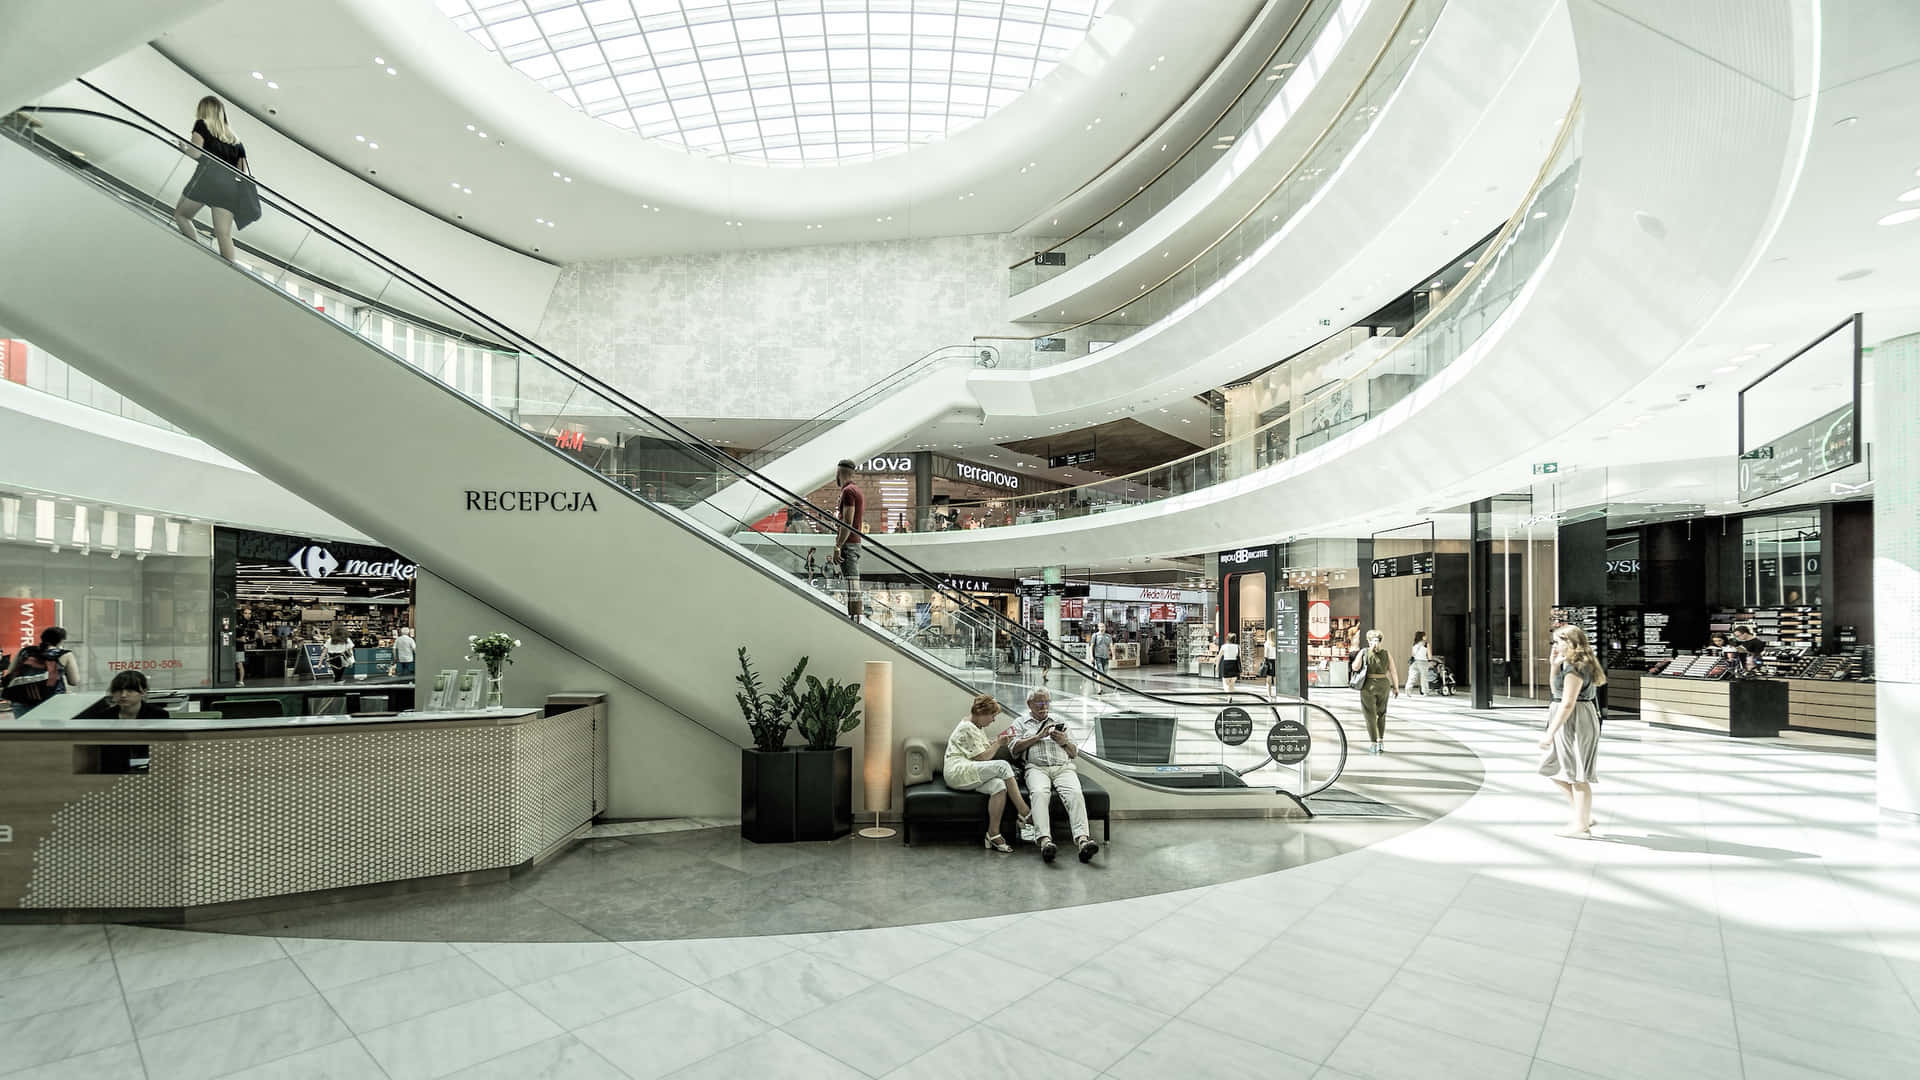 Vibrant and bustling shopping mall interior